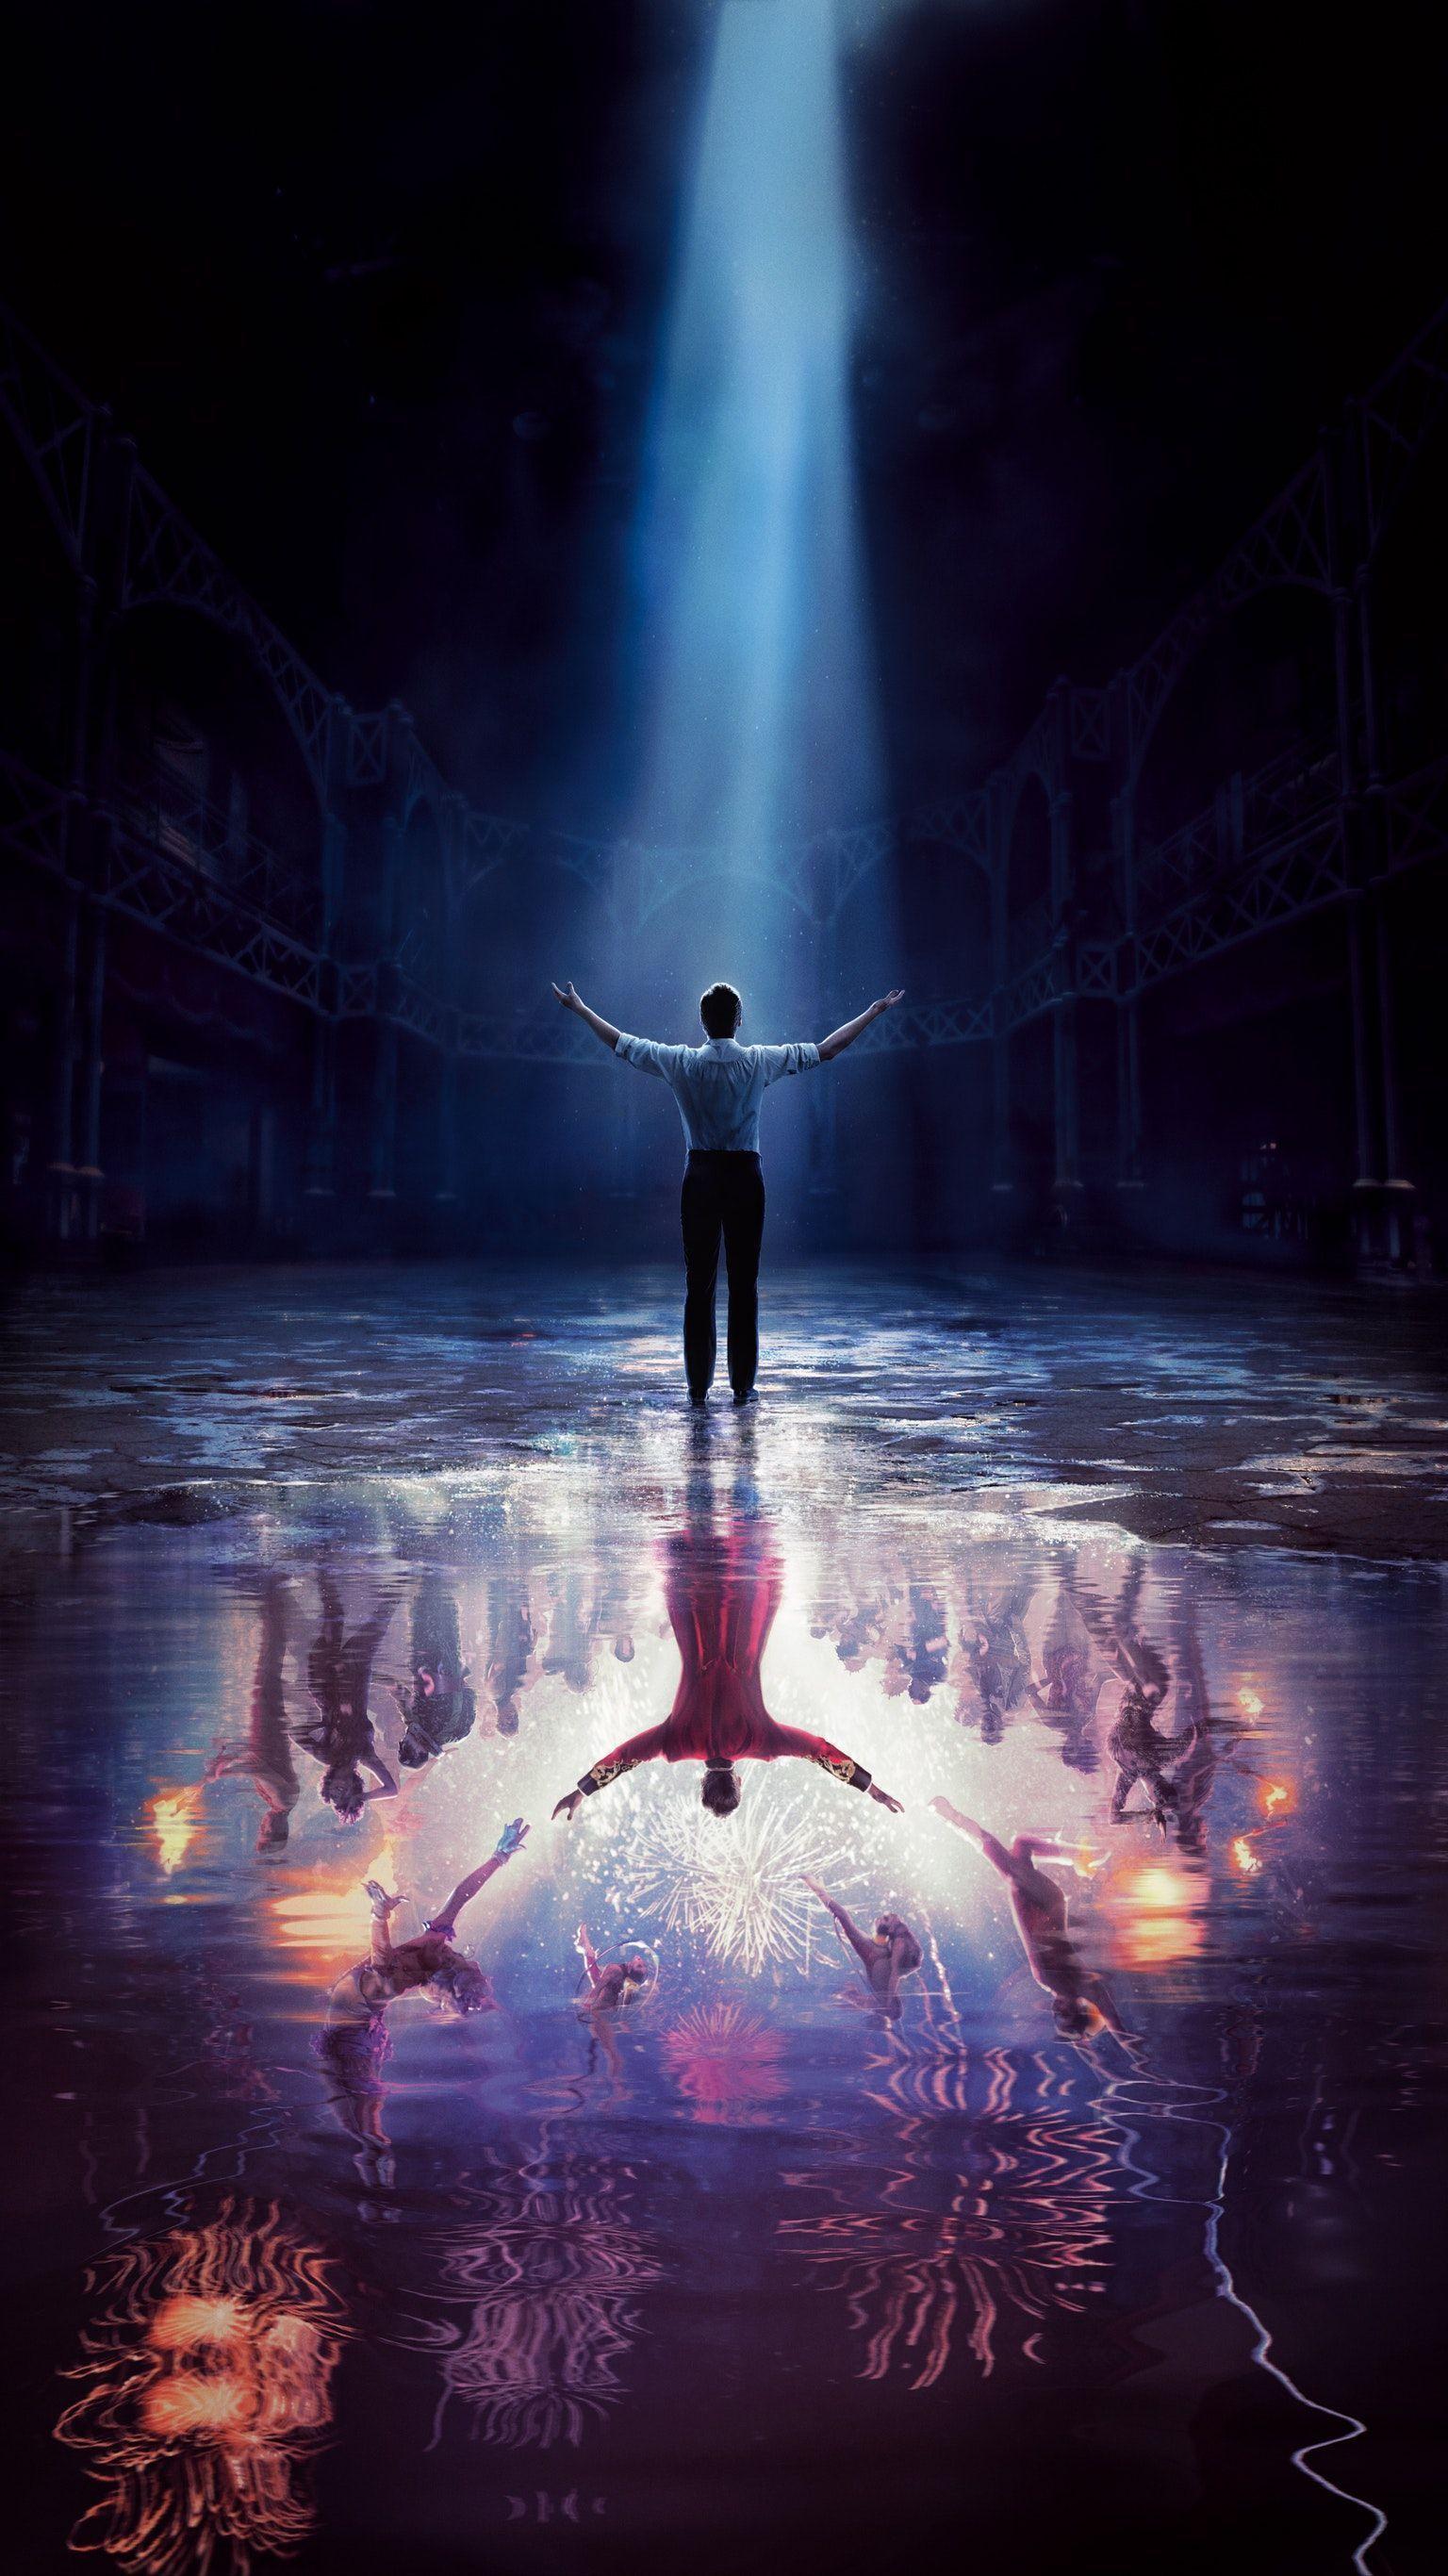 The Greatest Showman (2017) Phone Wallpaper. The greatest